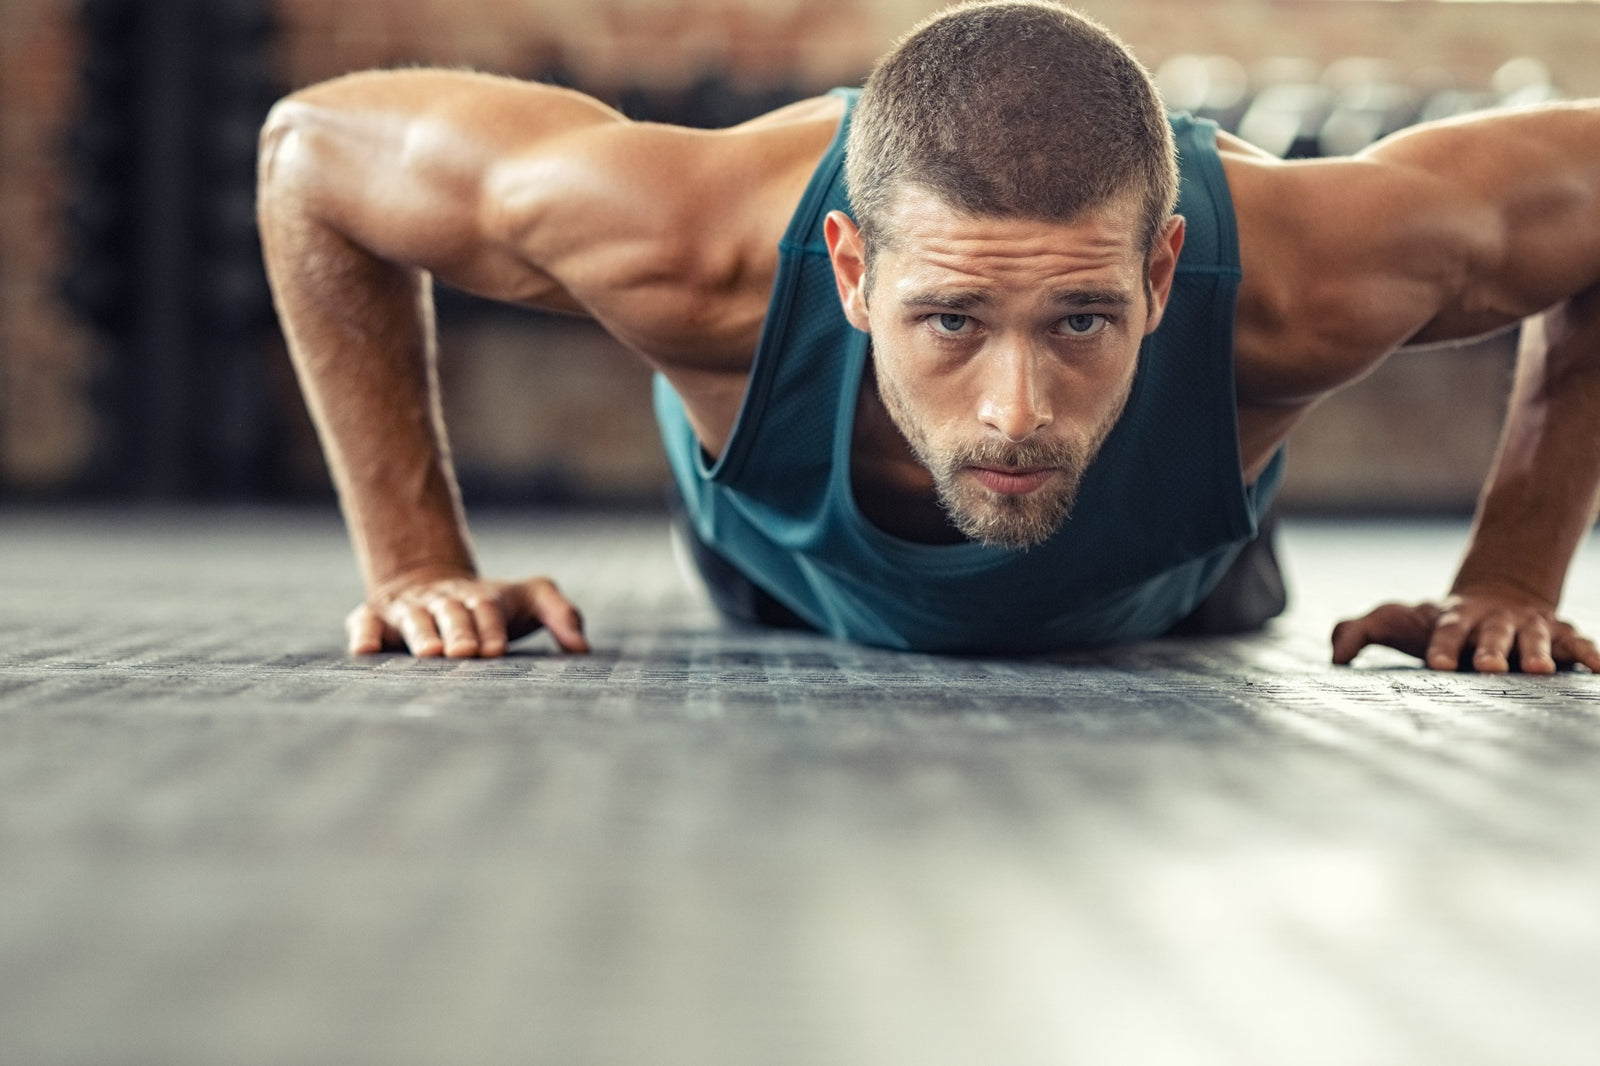 3 Challenging Muscle-Building Push-Ups - stack